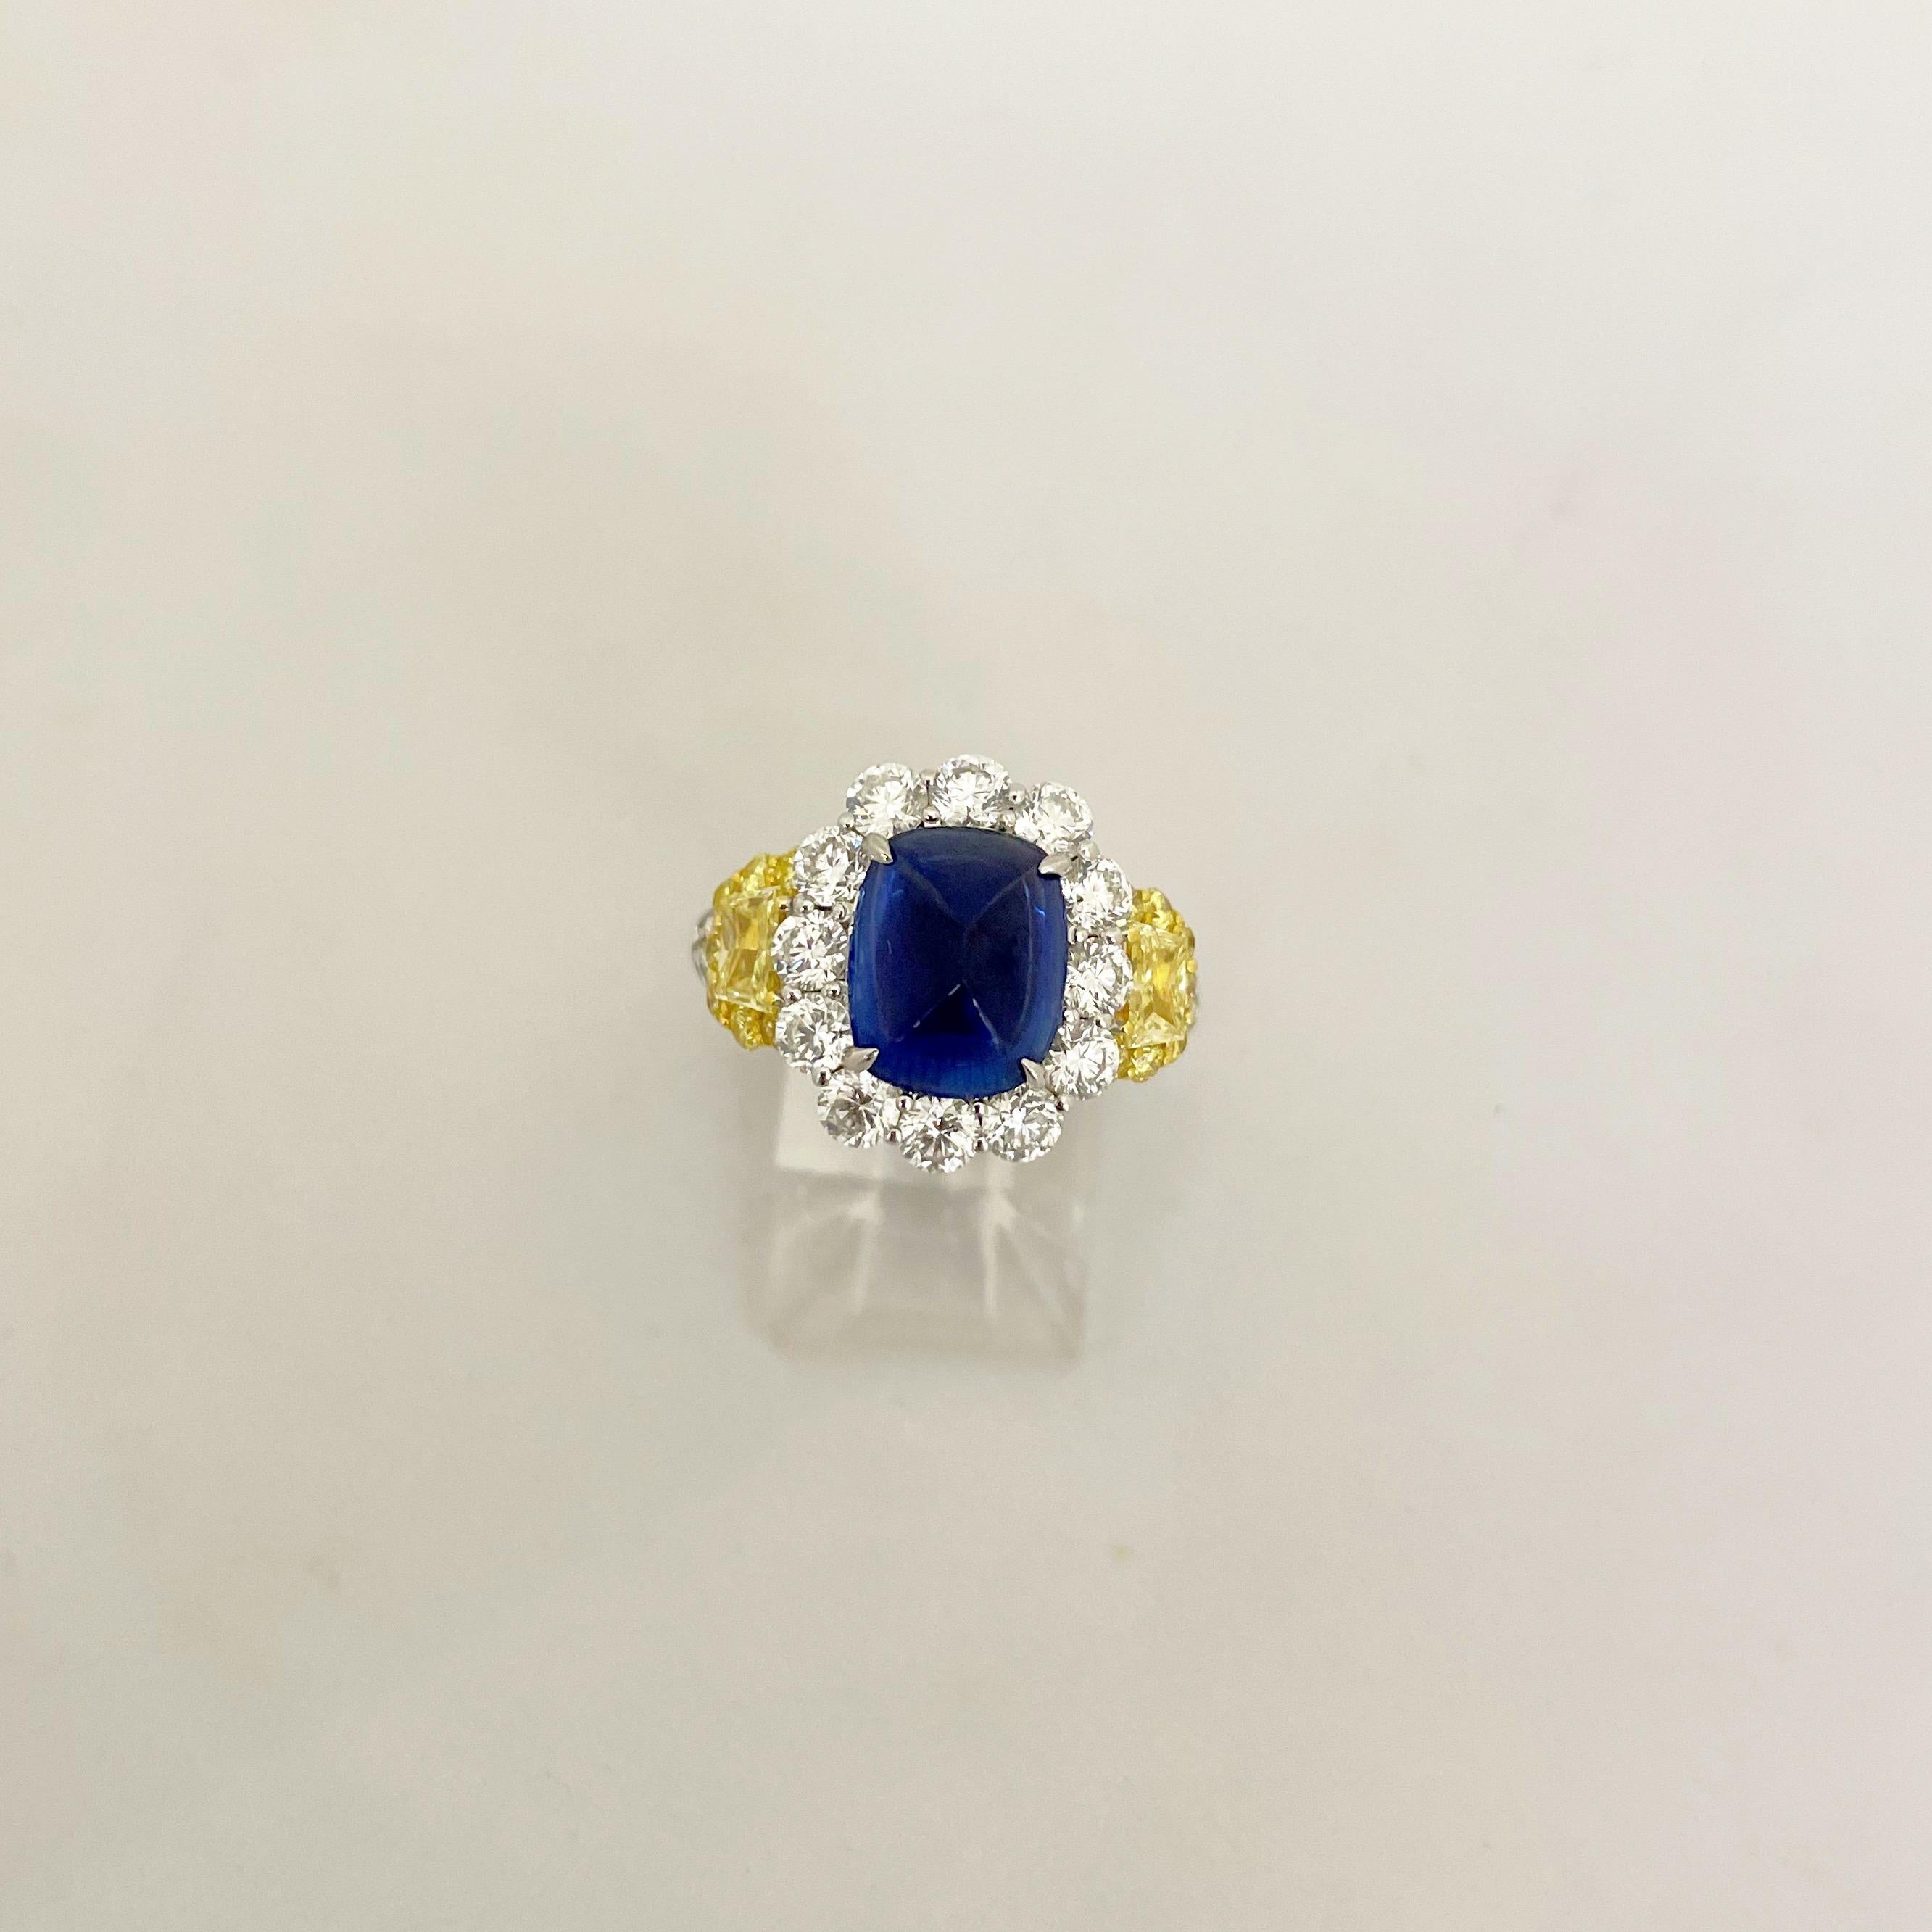 Cellini Plat/18KT 4.27Ct. Sugarloaf Sapphire, Fancy Yellow & White Diamond Ring In New Condition For Sale In New York, NY